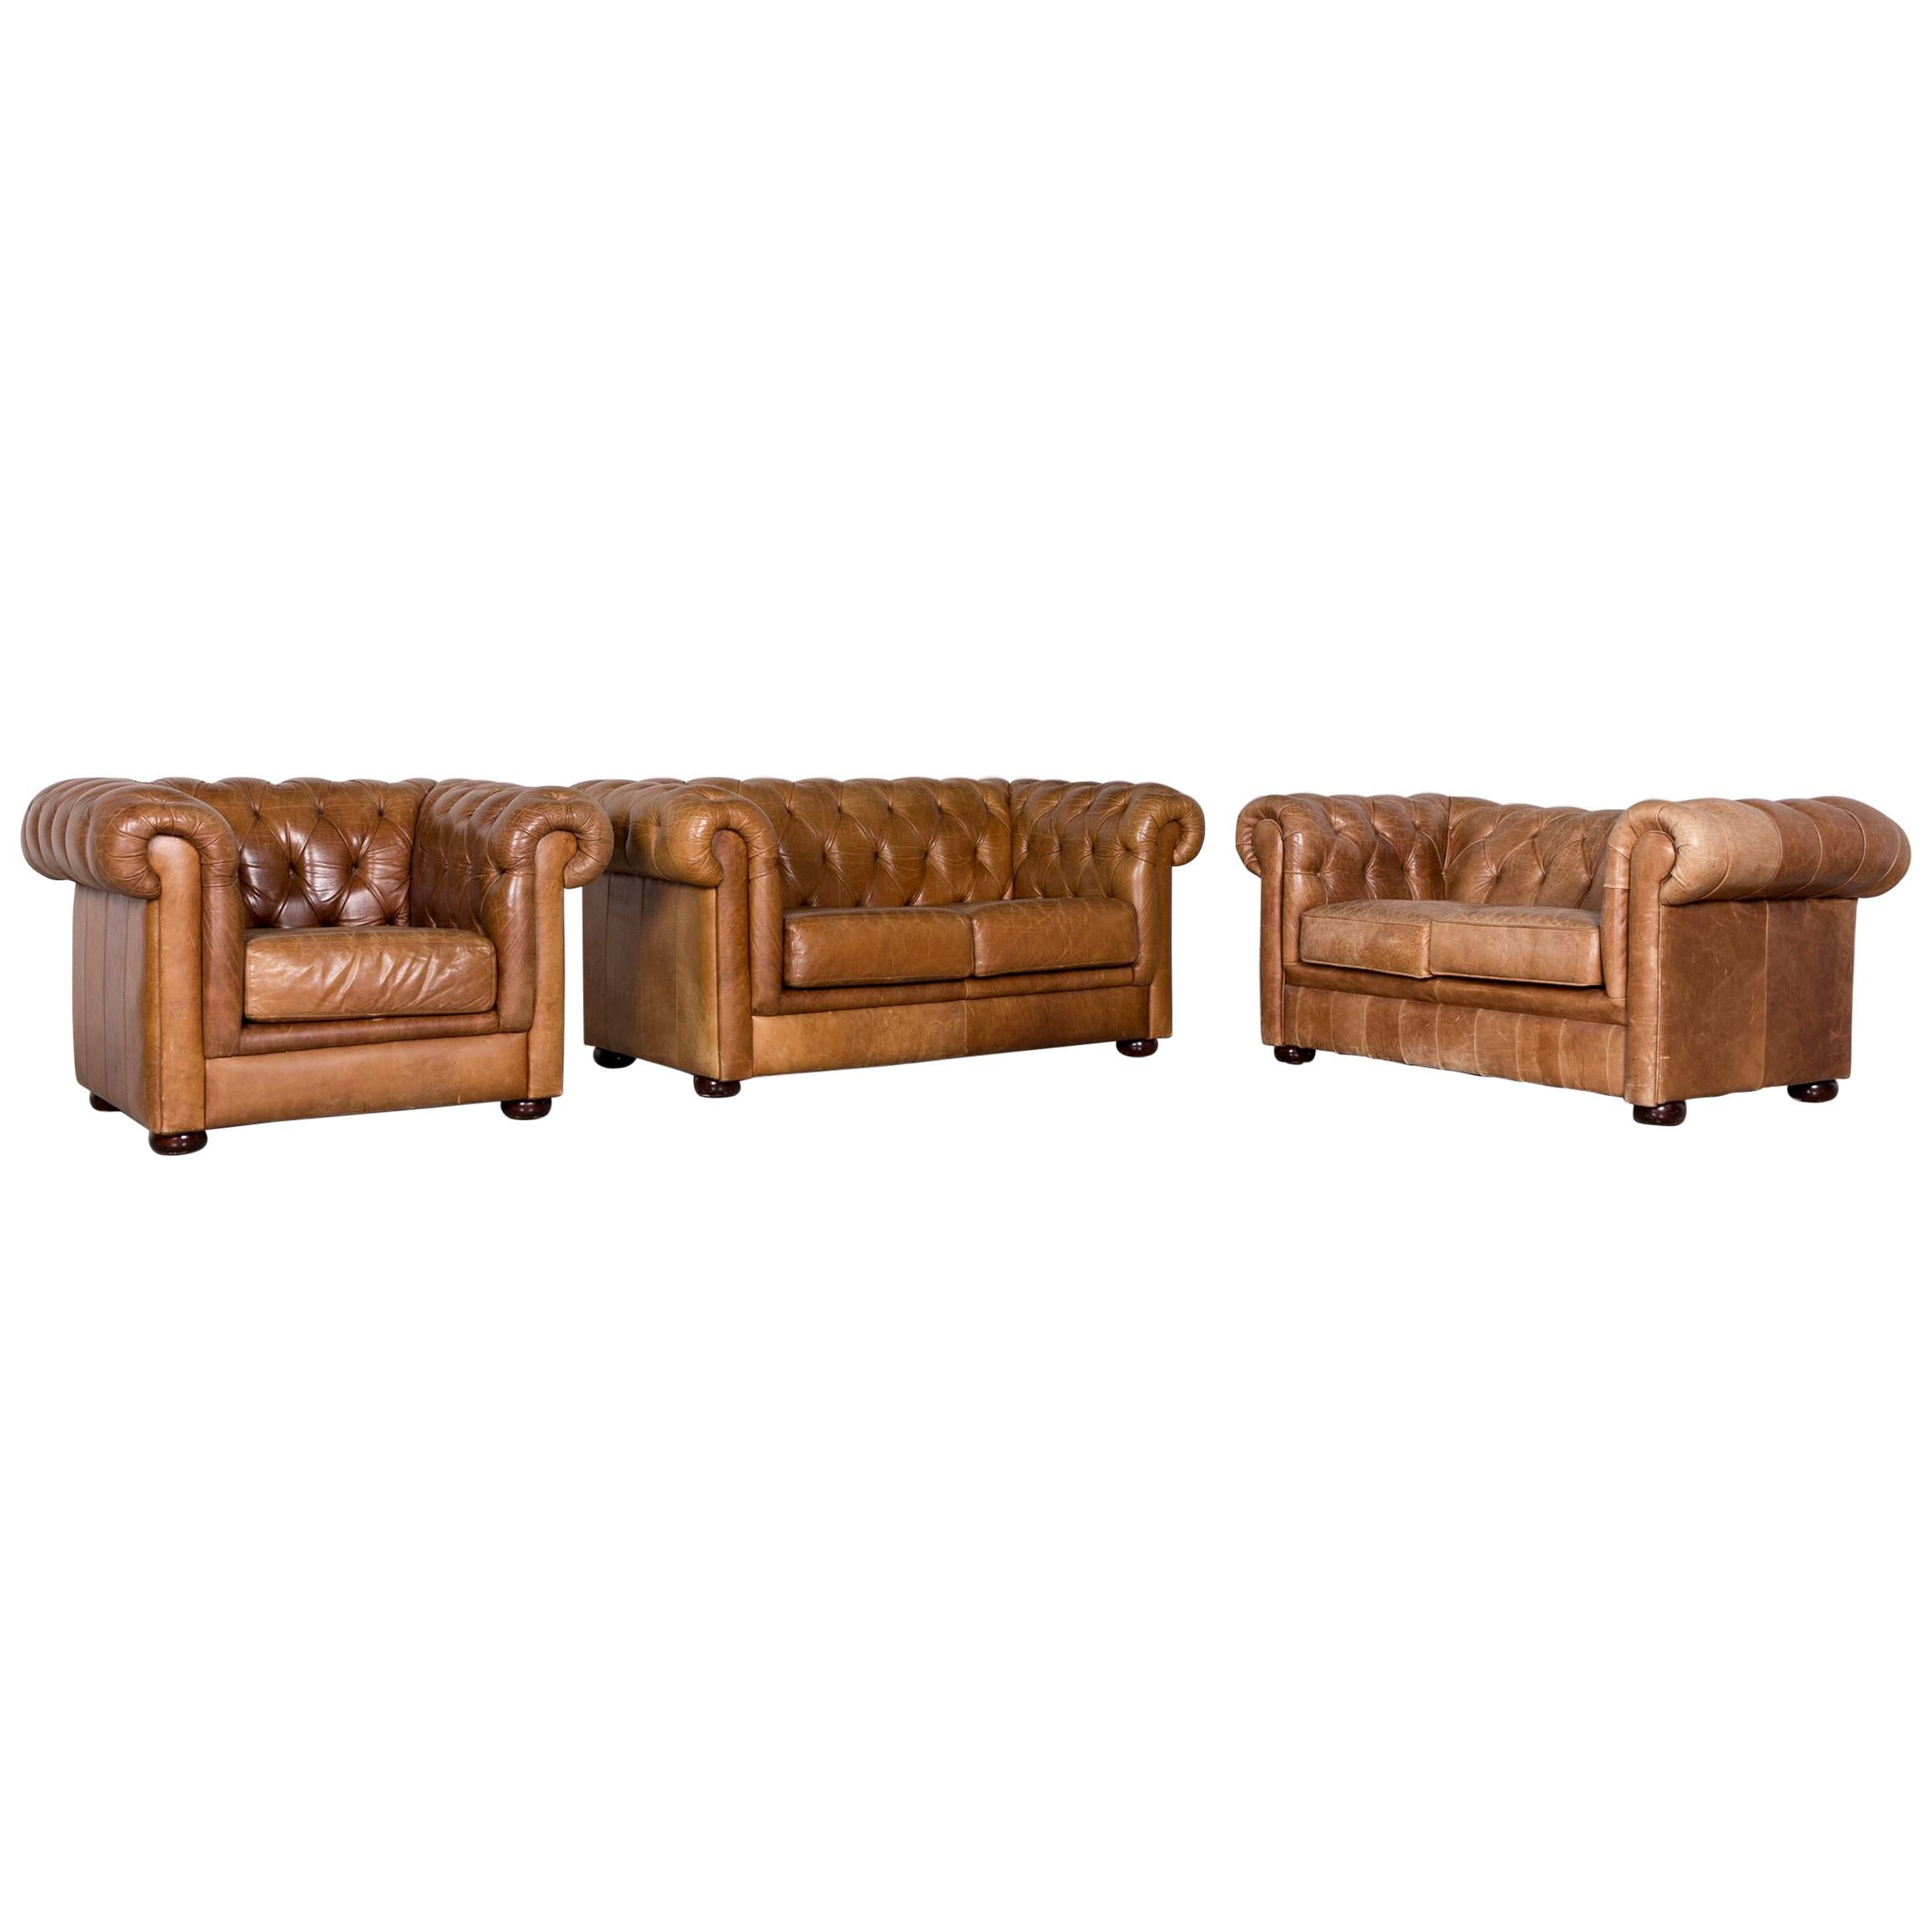 Chesterfield Leather Sofa Armchair Set Brown Red Vintage Two-Seat Couch For Sale